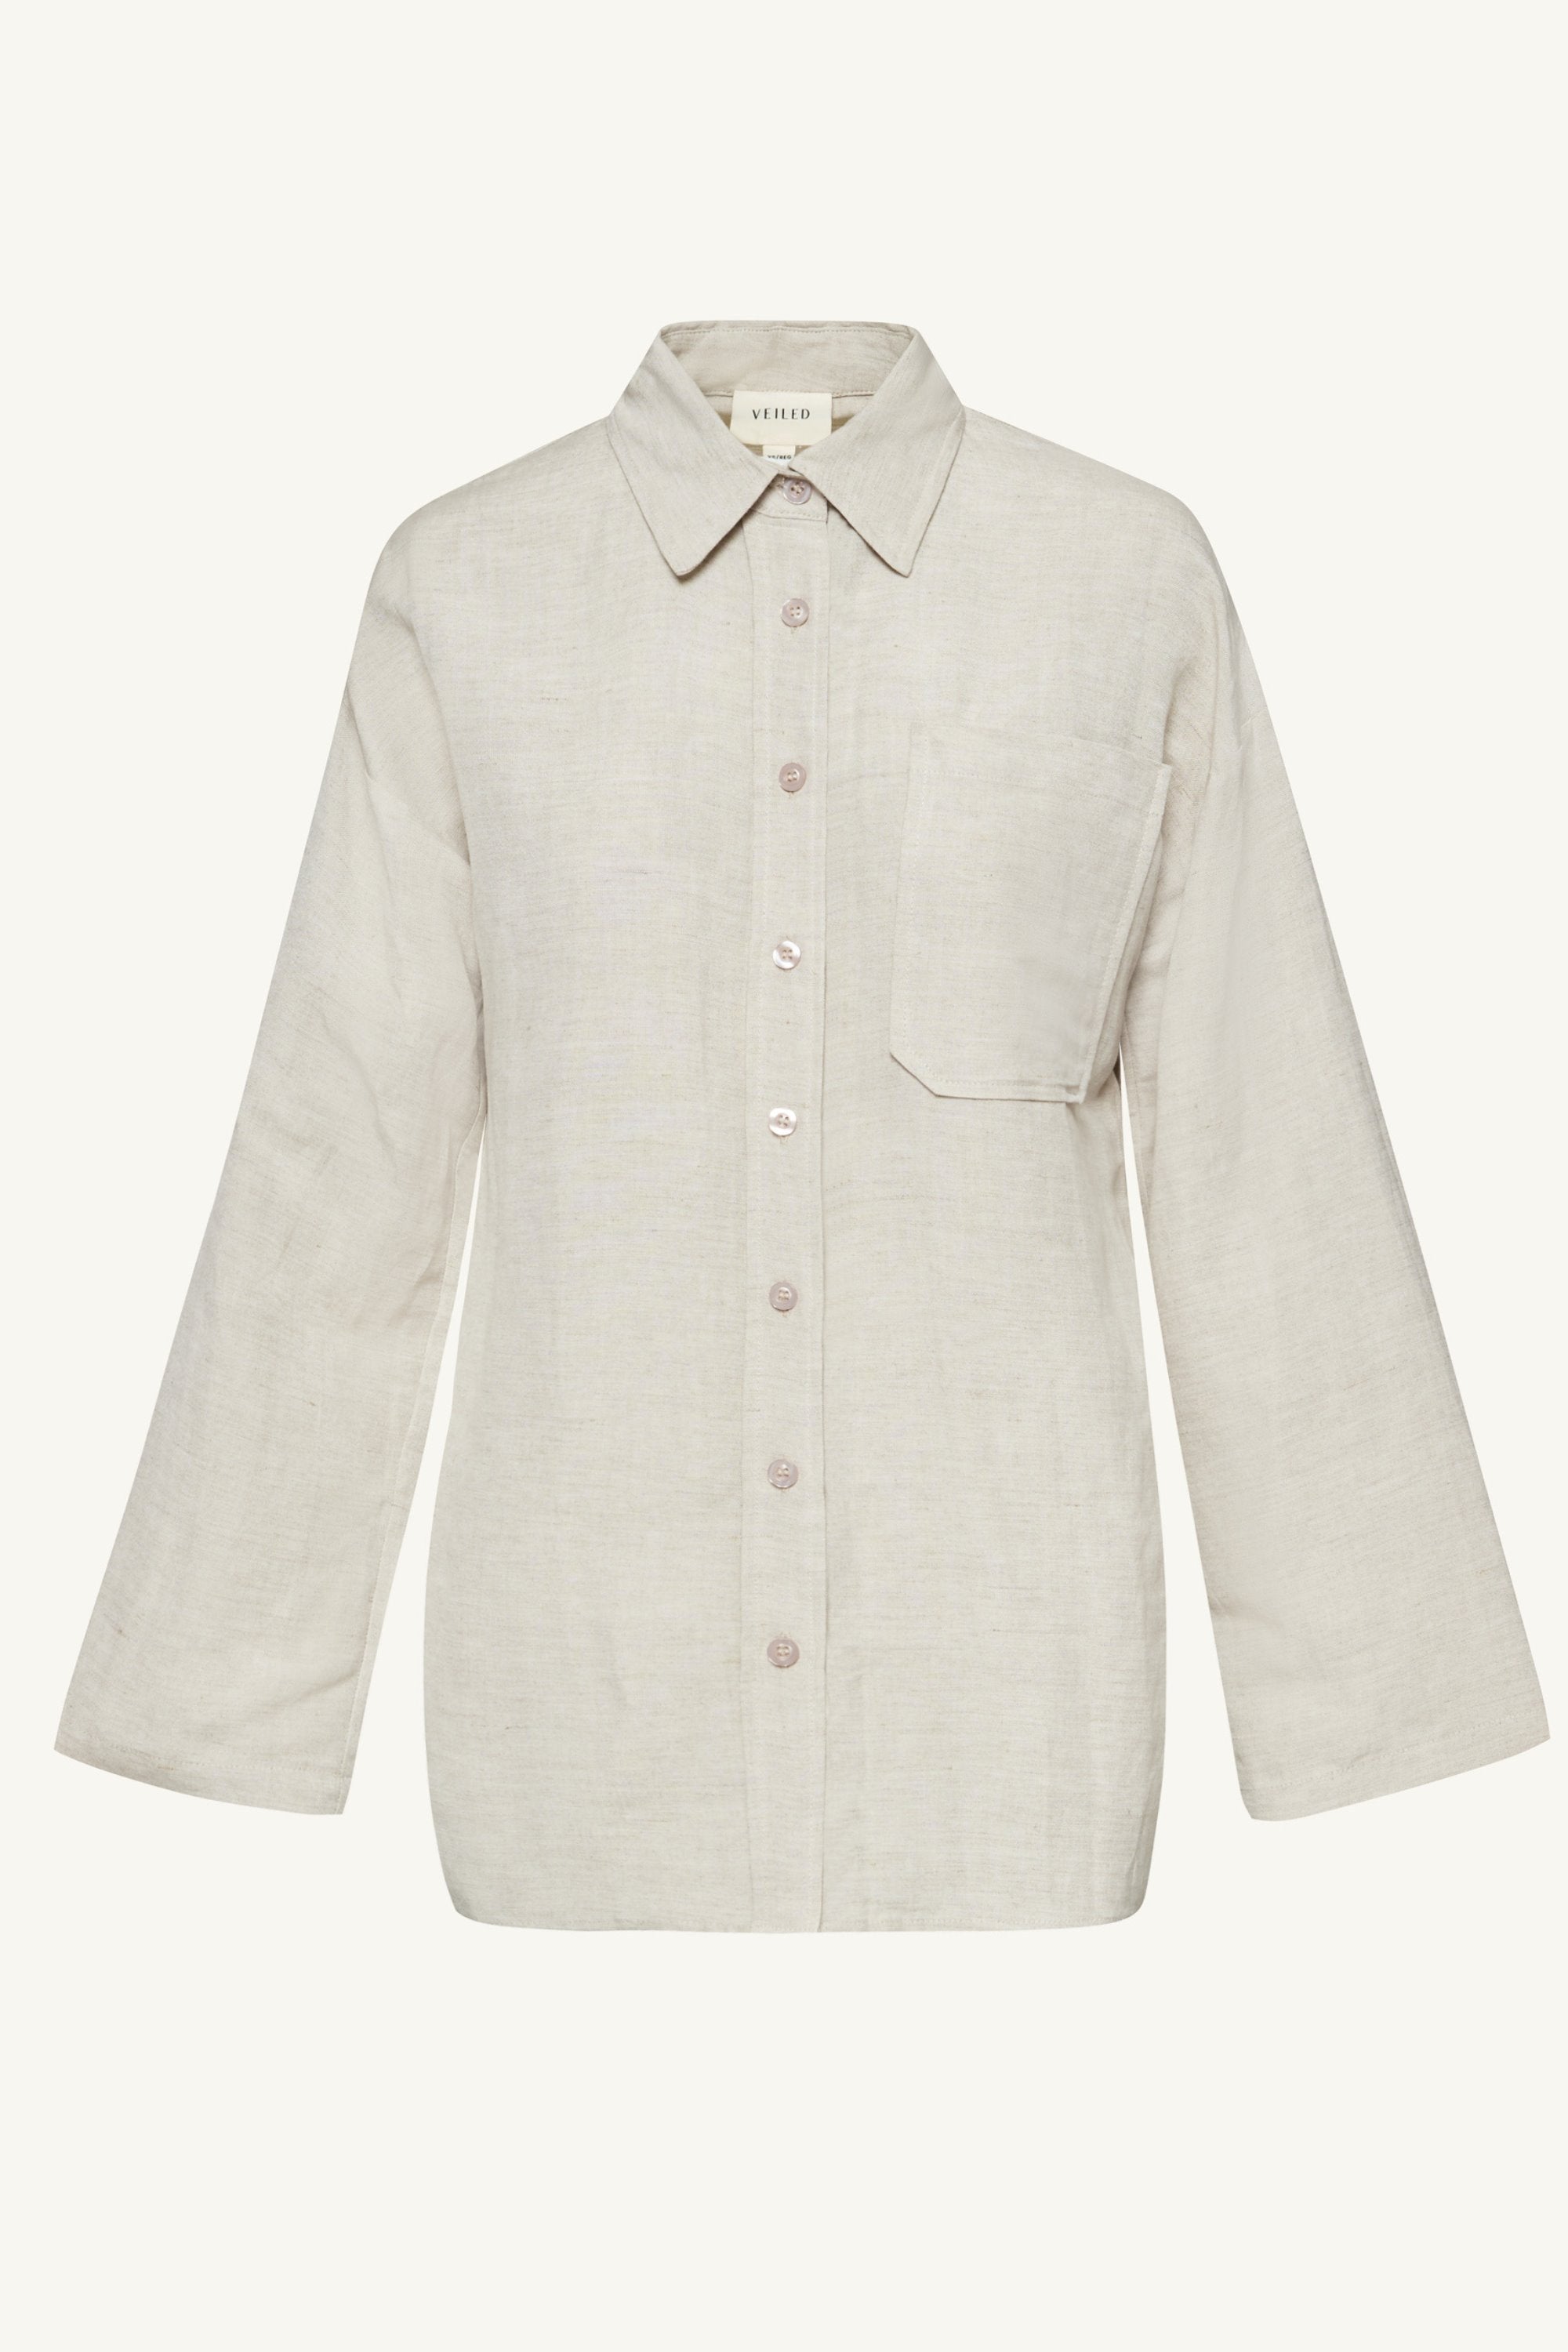 Adalila Linen Button Down Top - Oatmeal Clothing Veiled 